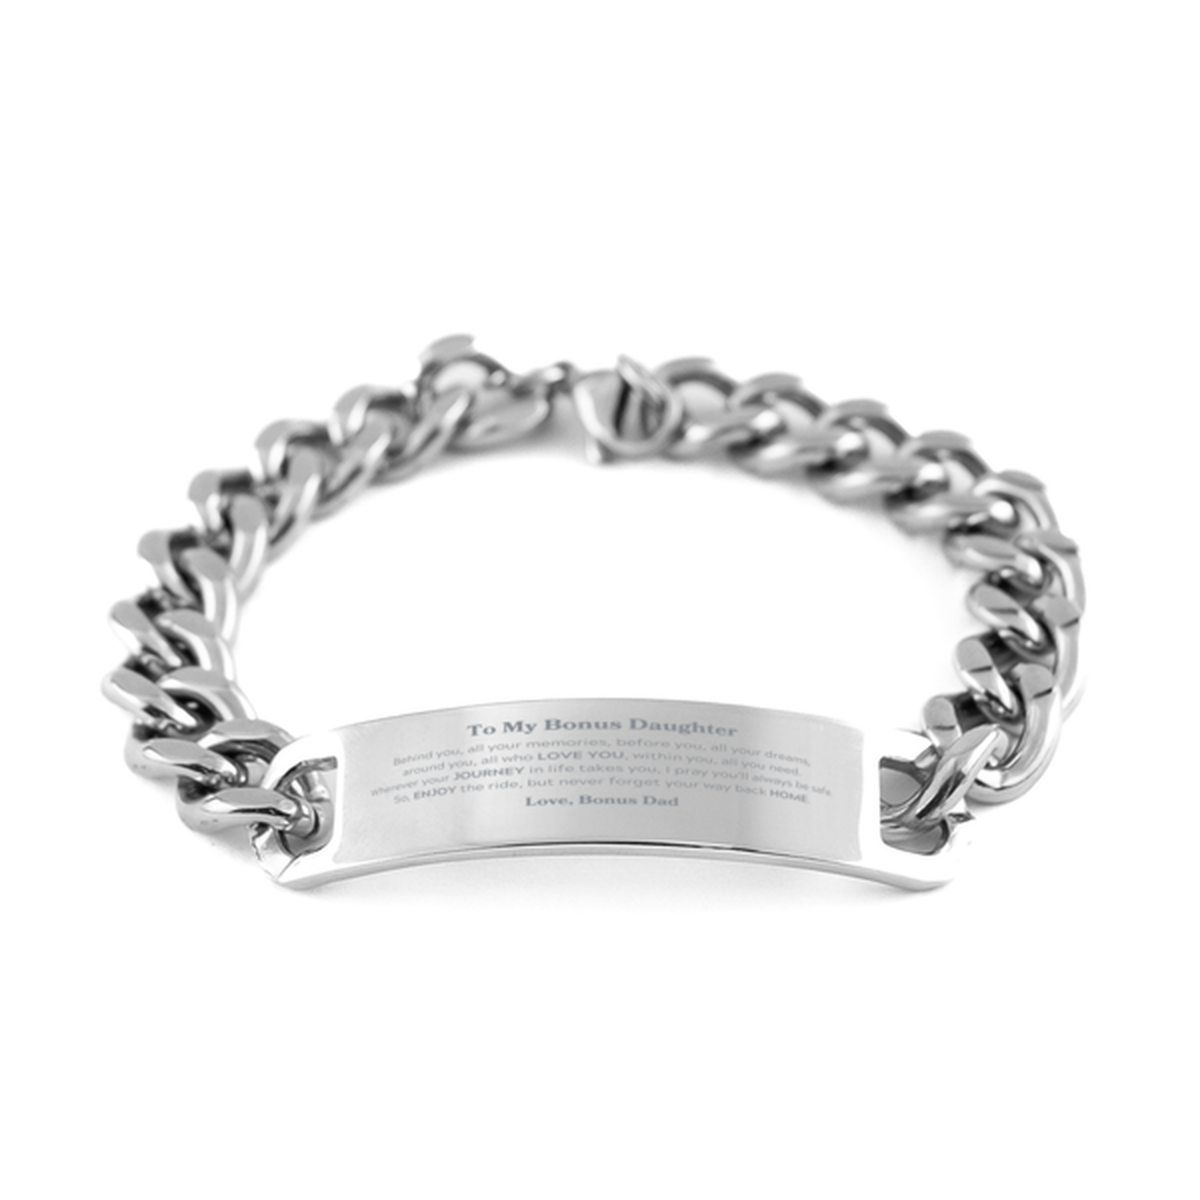 To My Bonus Daughter Graduation Gifts from Bonus Dad, Bonus Daughter Cuban Chain Stainless Steel Bracelet Christmas Birthday Gifts for Bonus Daughter Behind you, all your memories, before you, all your dreams. Love, Bonus Dad